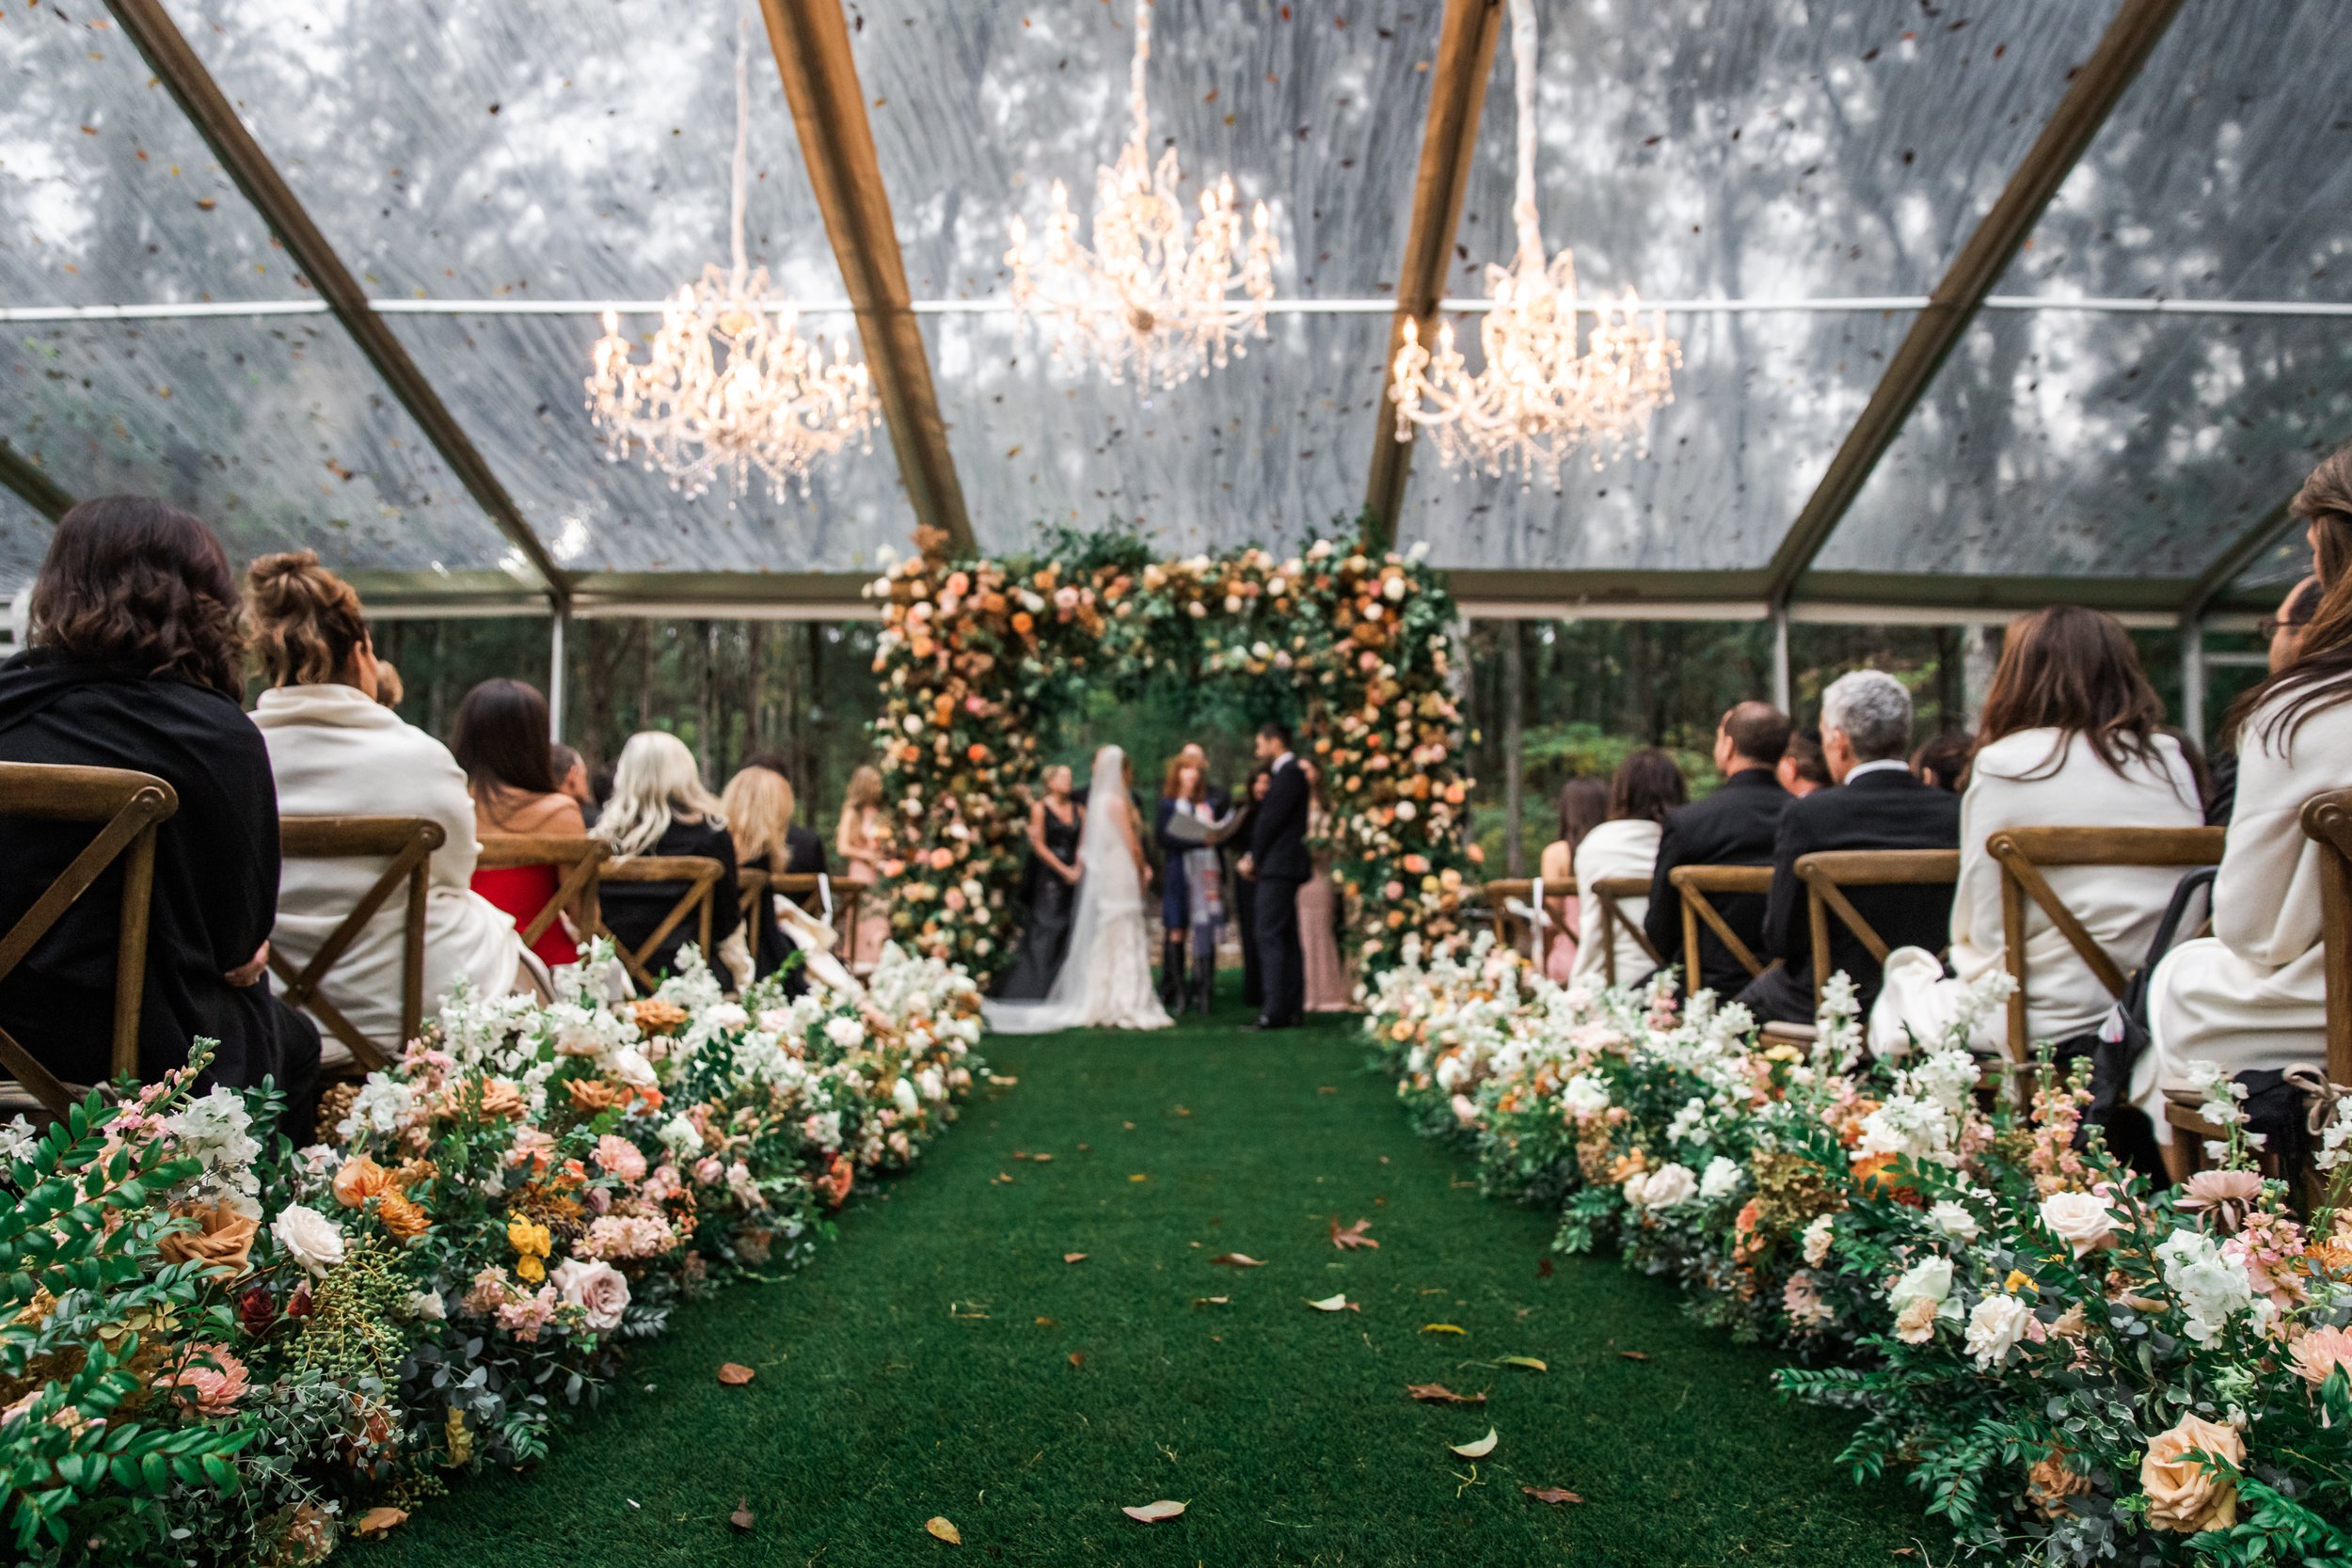 Lush floral hedges create aisle meadows for this fall wedding. Florals feature hues of terra cotta, blush, yellow, copper, and neutrals. Beautiful garden roses, dahlias, and fall florals highlight these arrangements. Design by Rosemary and Finch in N